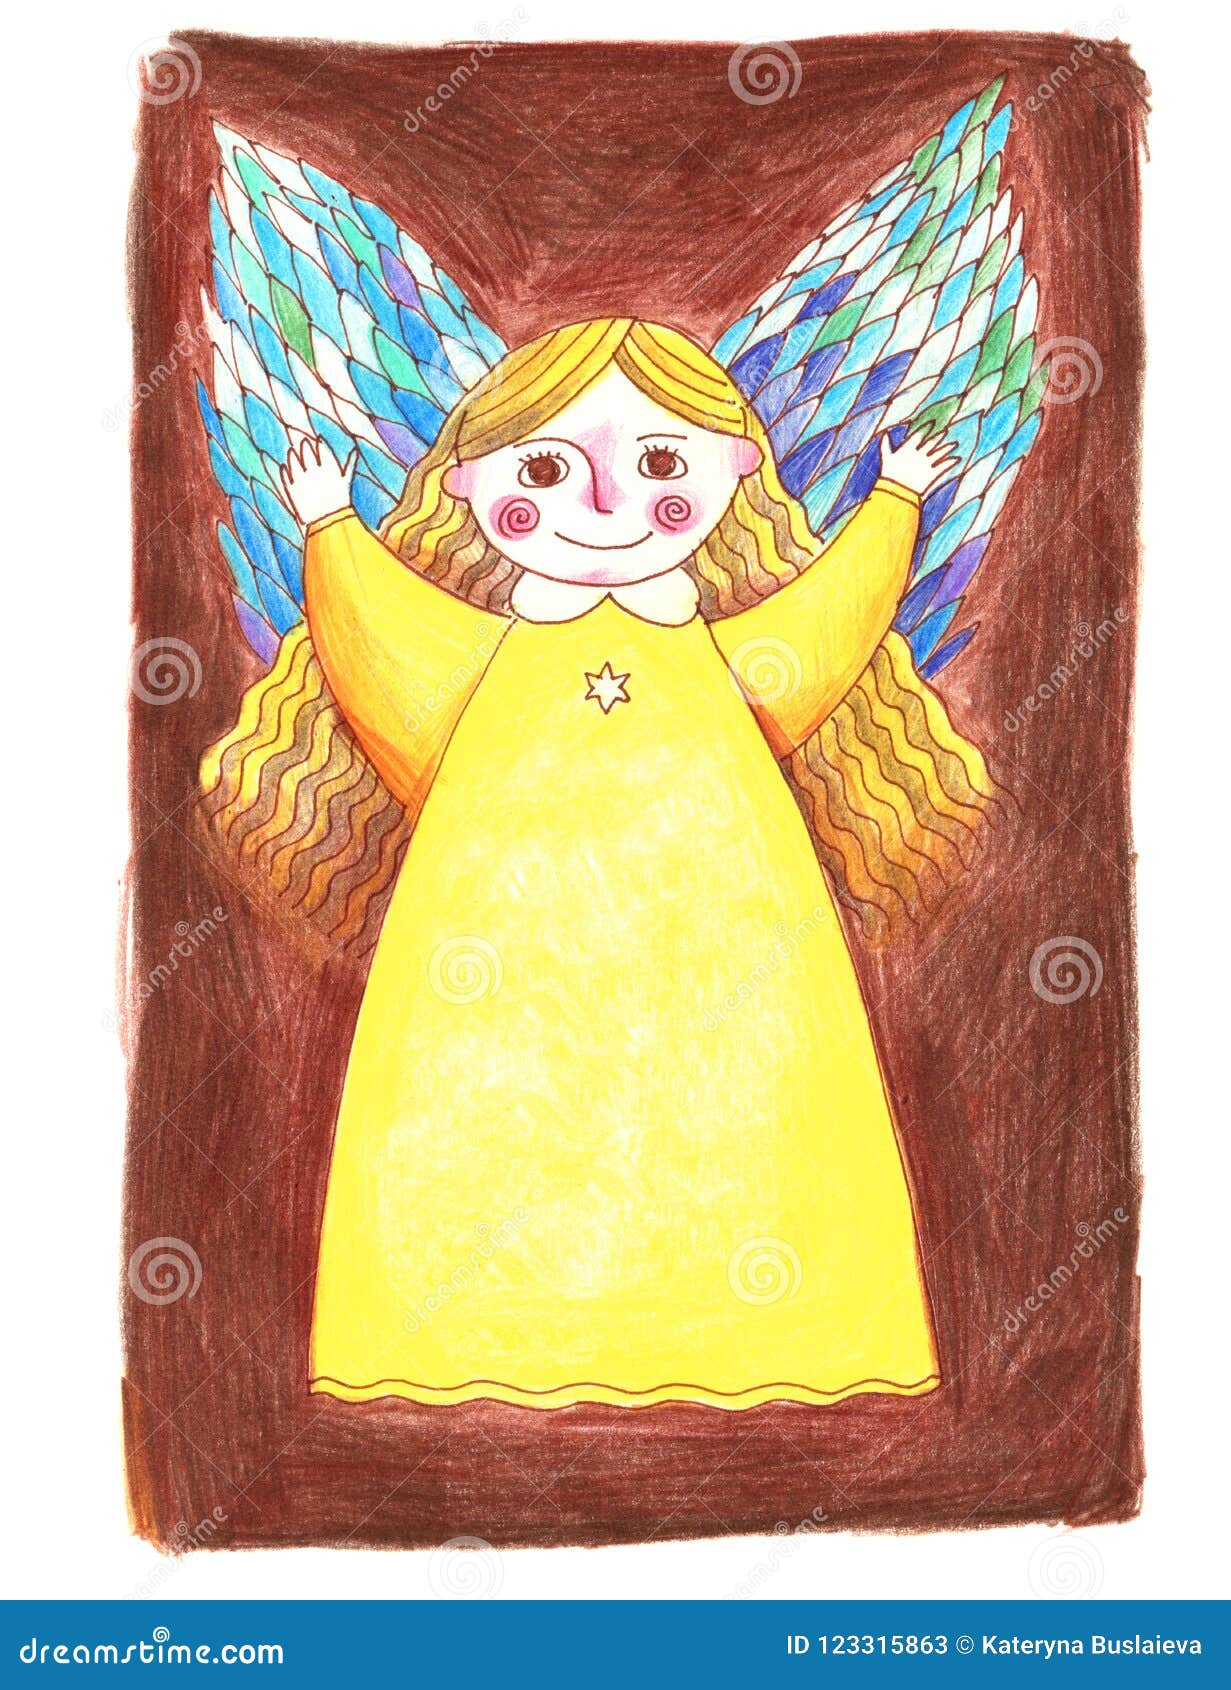 drawings of angels for kids